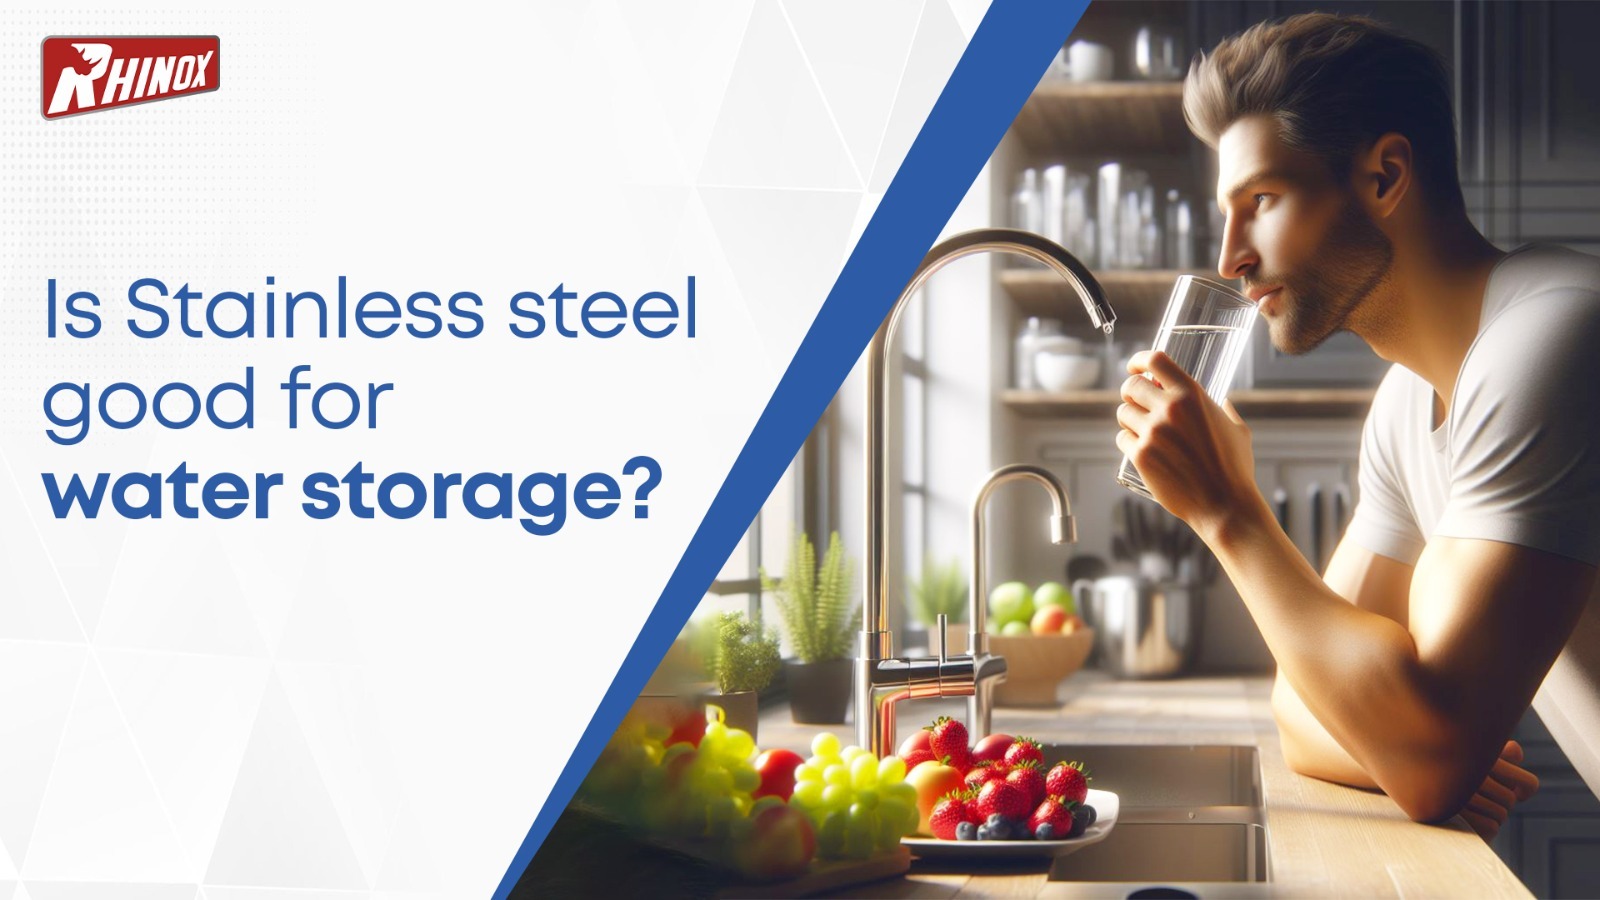 Is Stainless steel good for water storage?